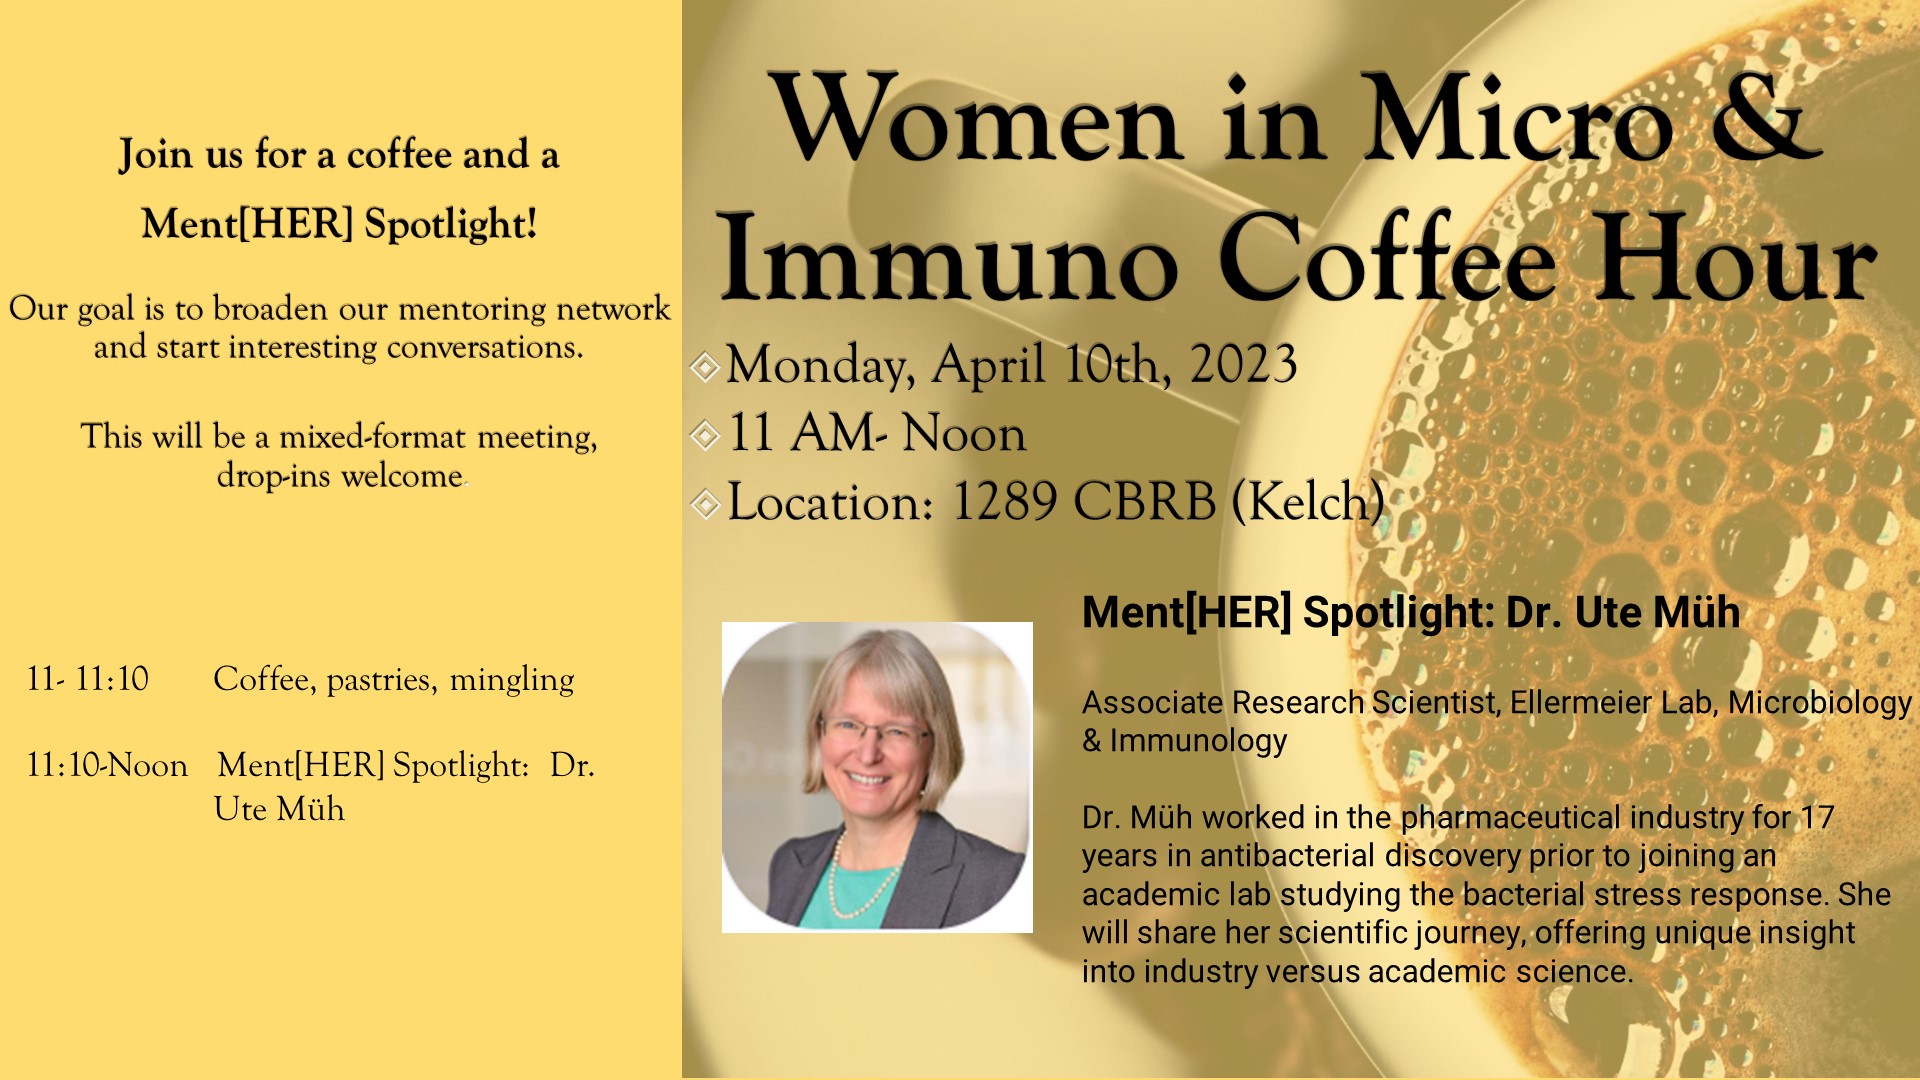 Women in Microbiology and Immunology Coffee Hour 4/10/23 1289 CBRB at 11am